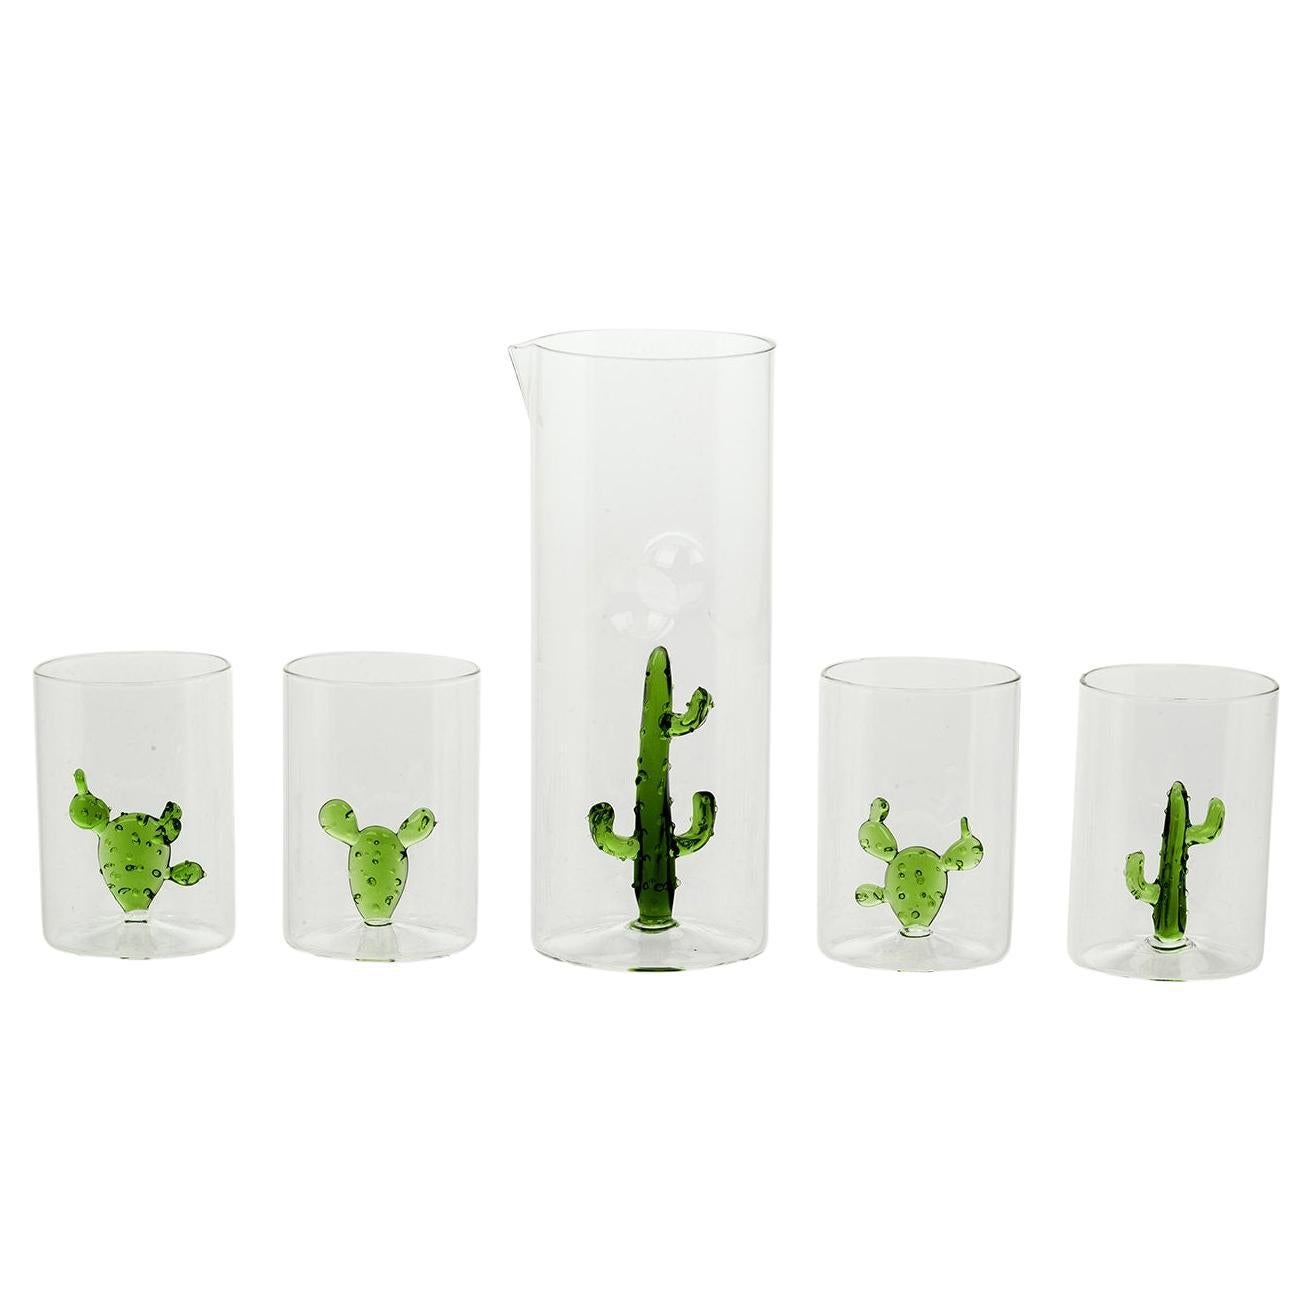 Cactus Set of 4 Glasses and Pitcher